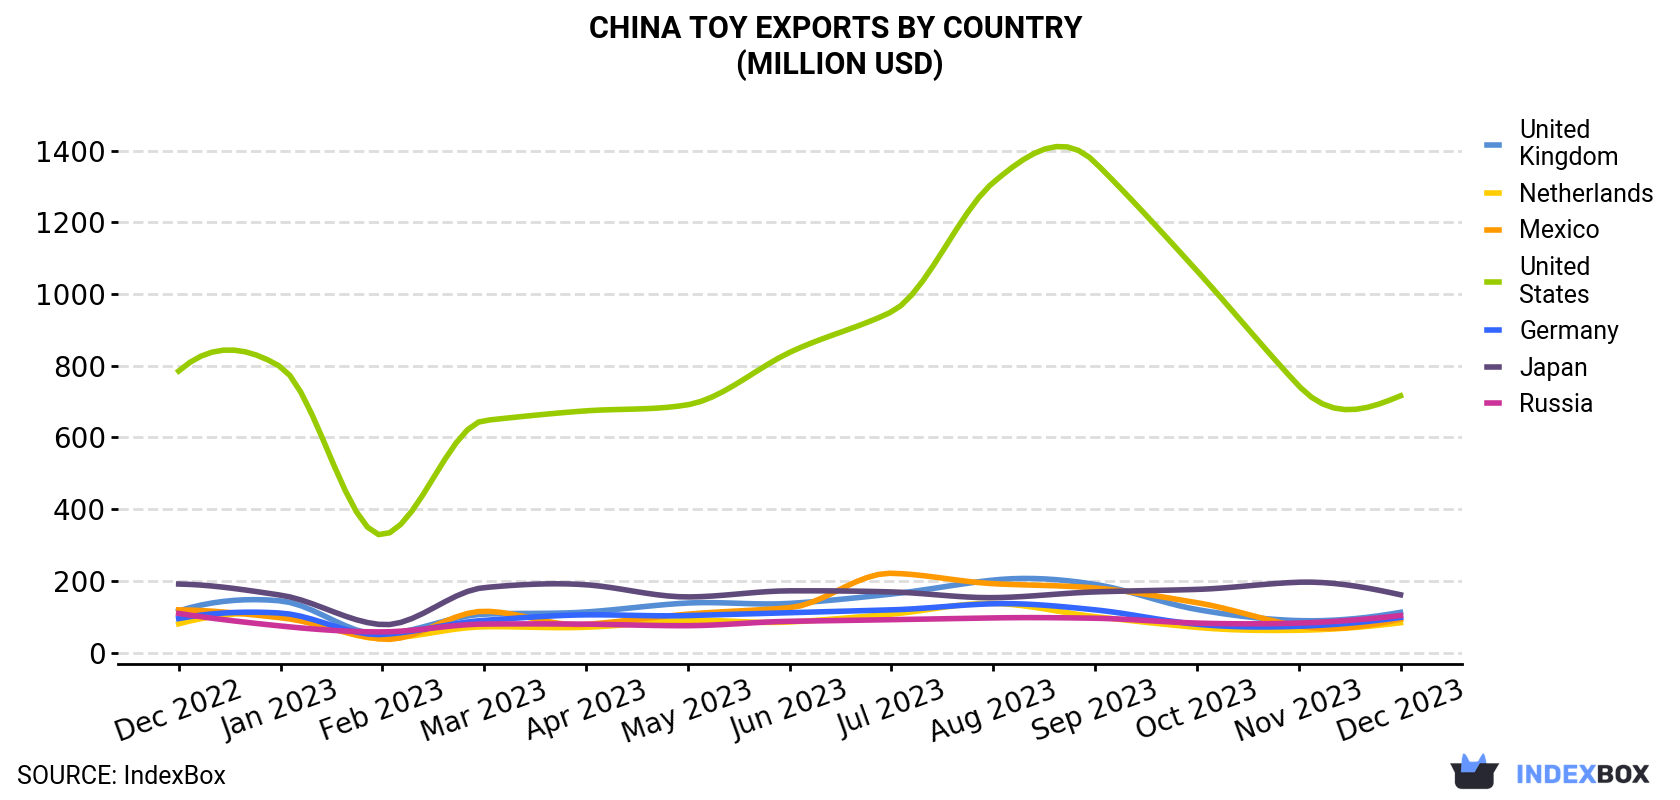 China Toy Exports By Country (Million USD)